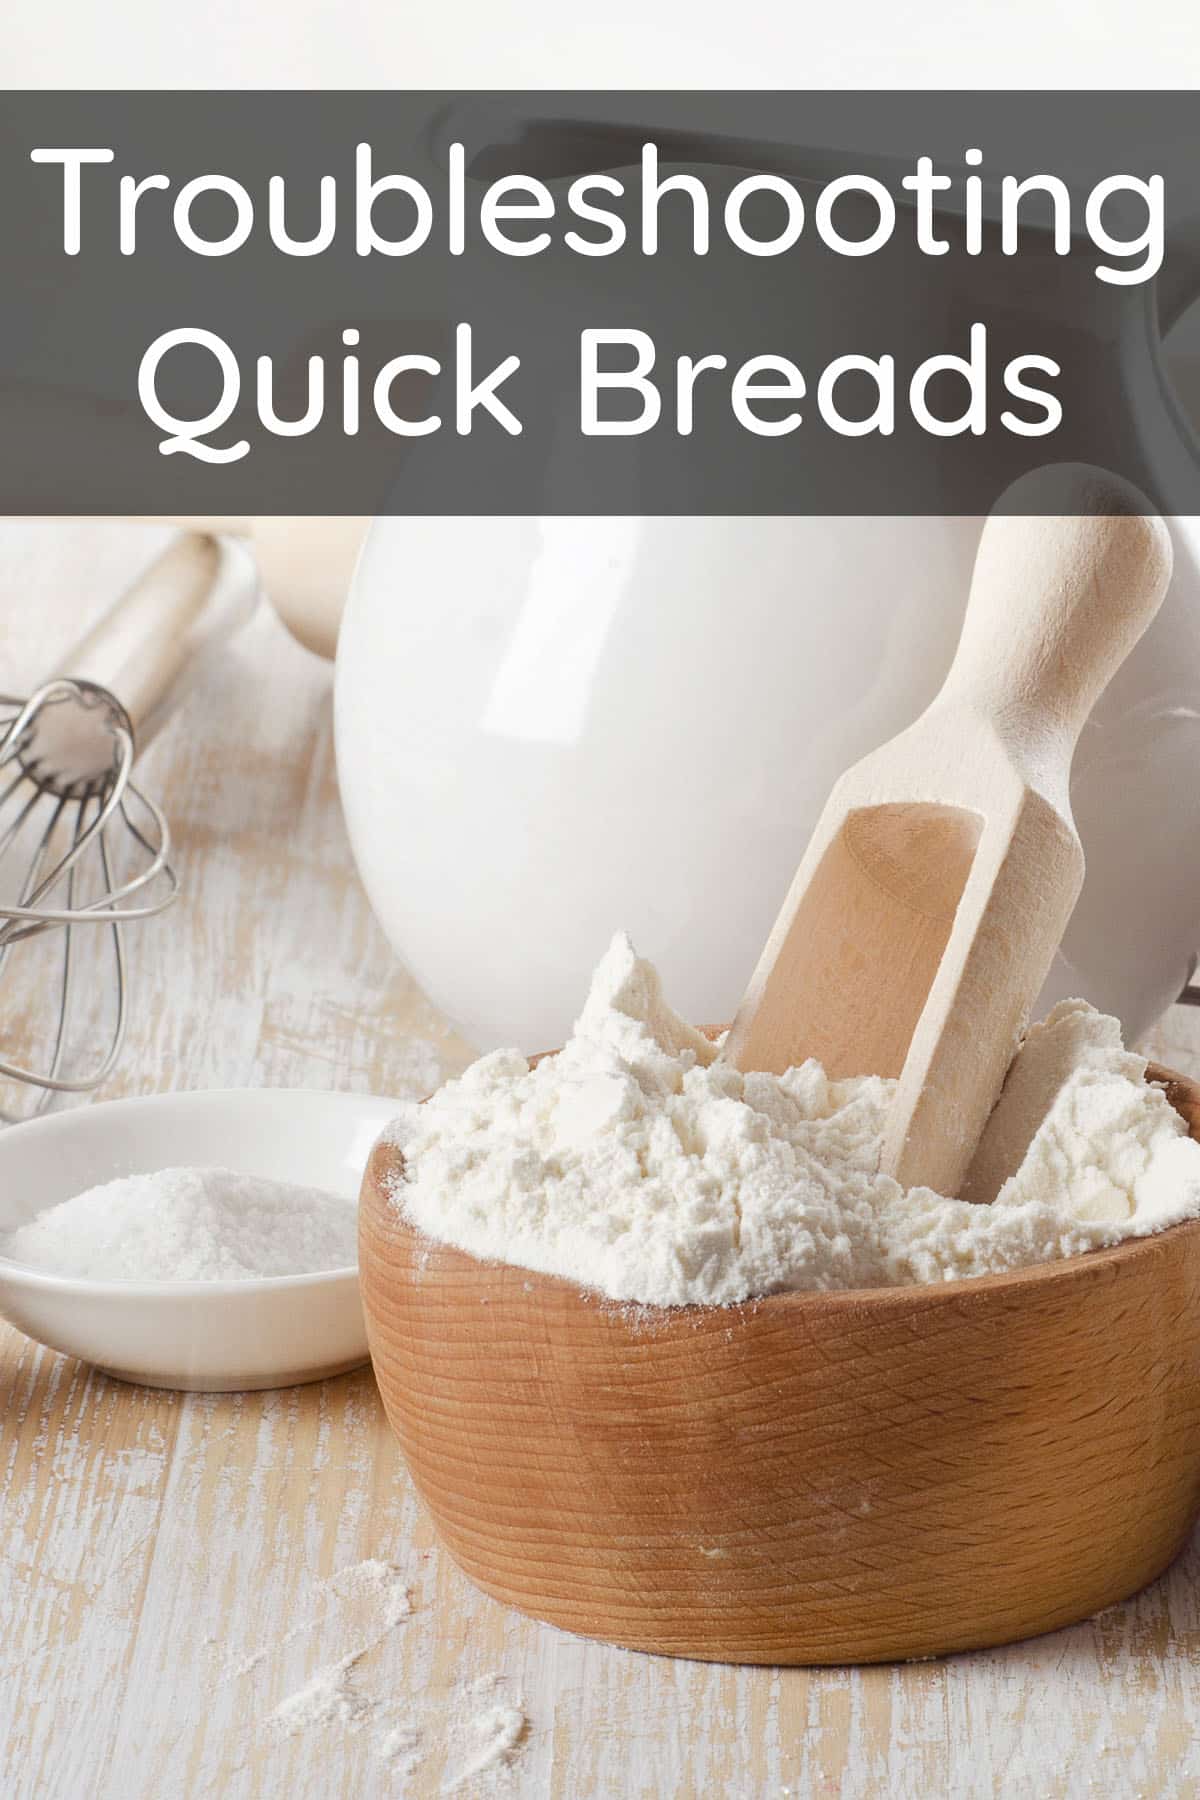 Troubleshooting Quick Breads